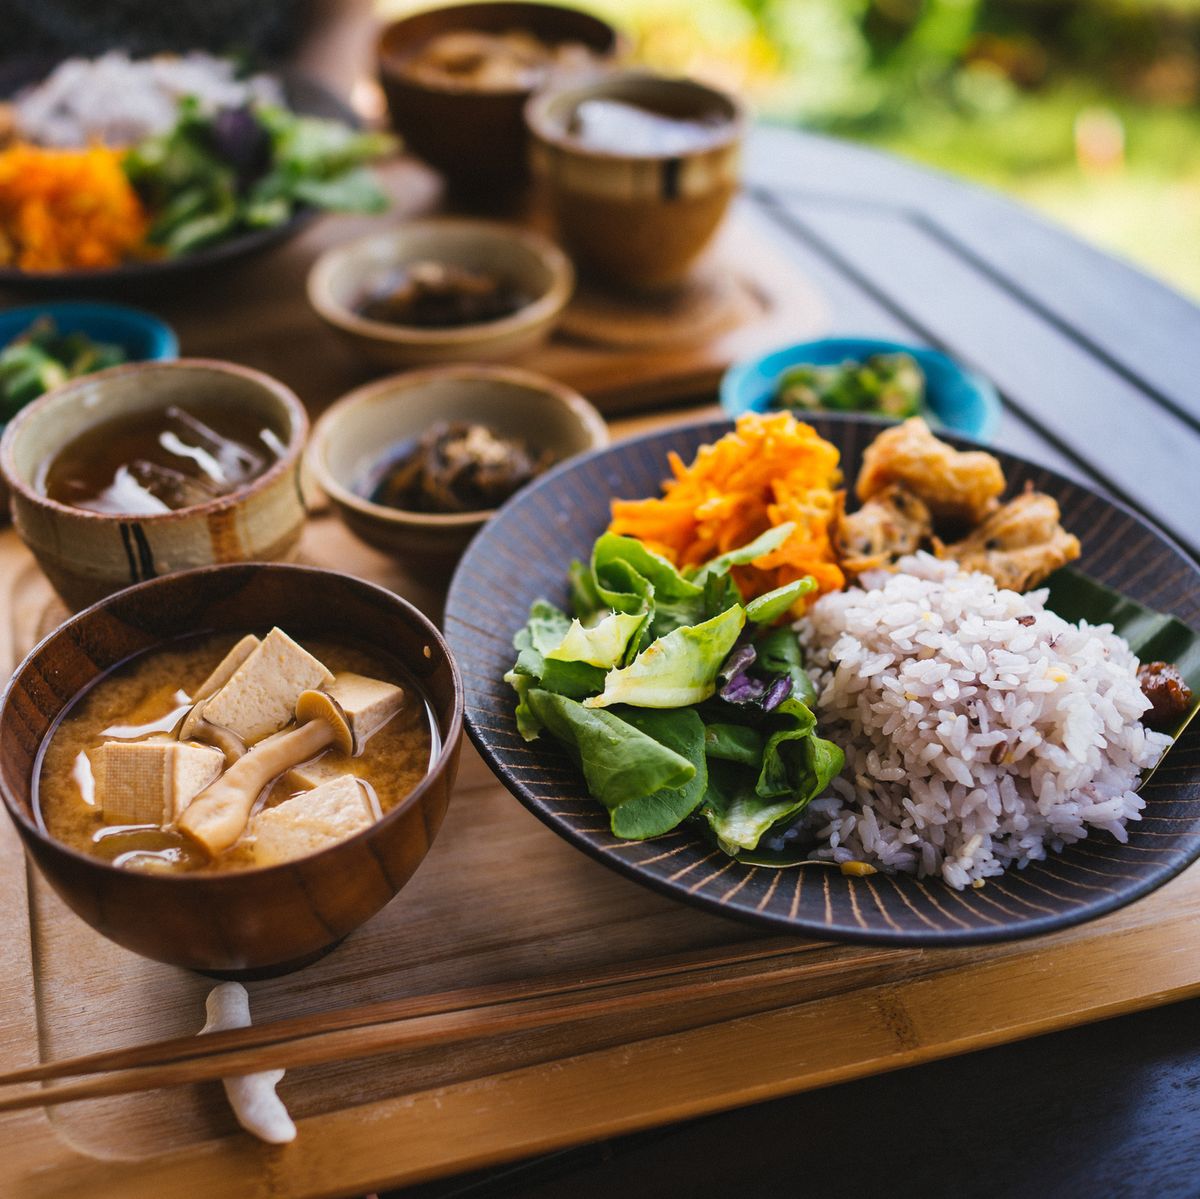 A typical breakfast in Okinawa, with lots of whole grains and greens